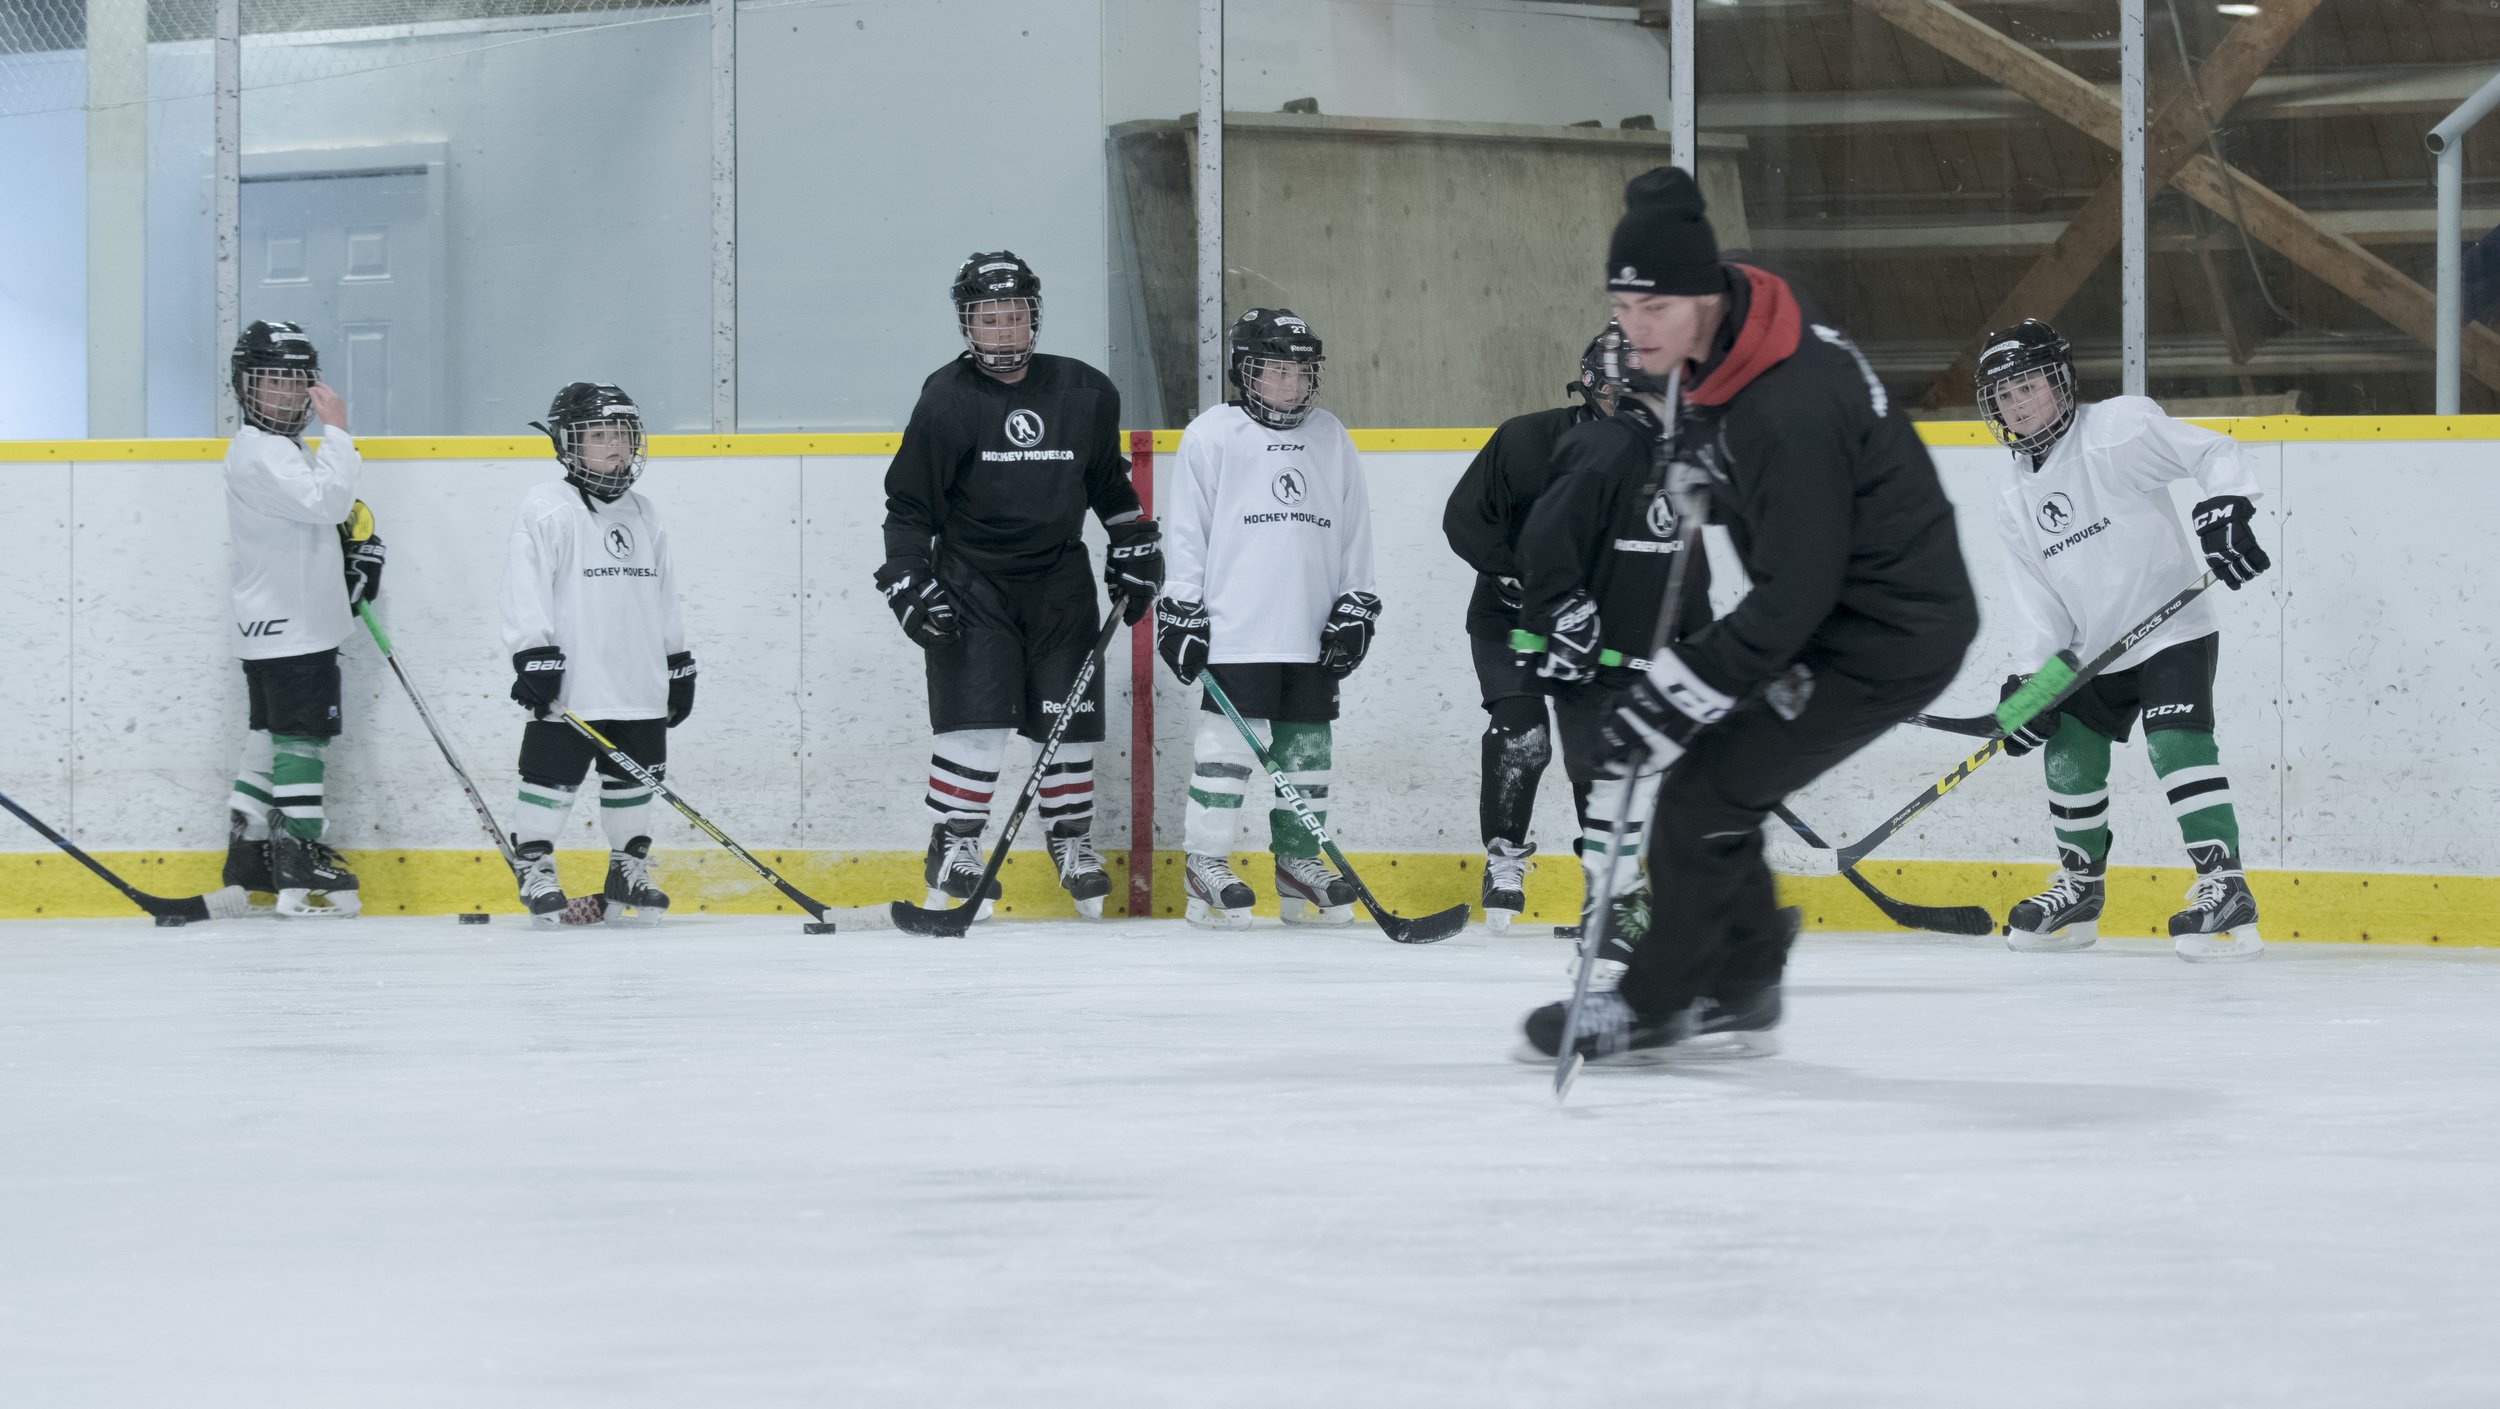  Coach Jason demonstrating a drill for Hockey Moves campers, 2019 